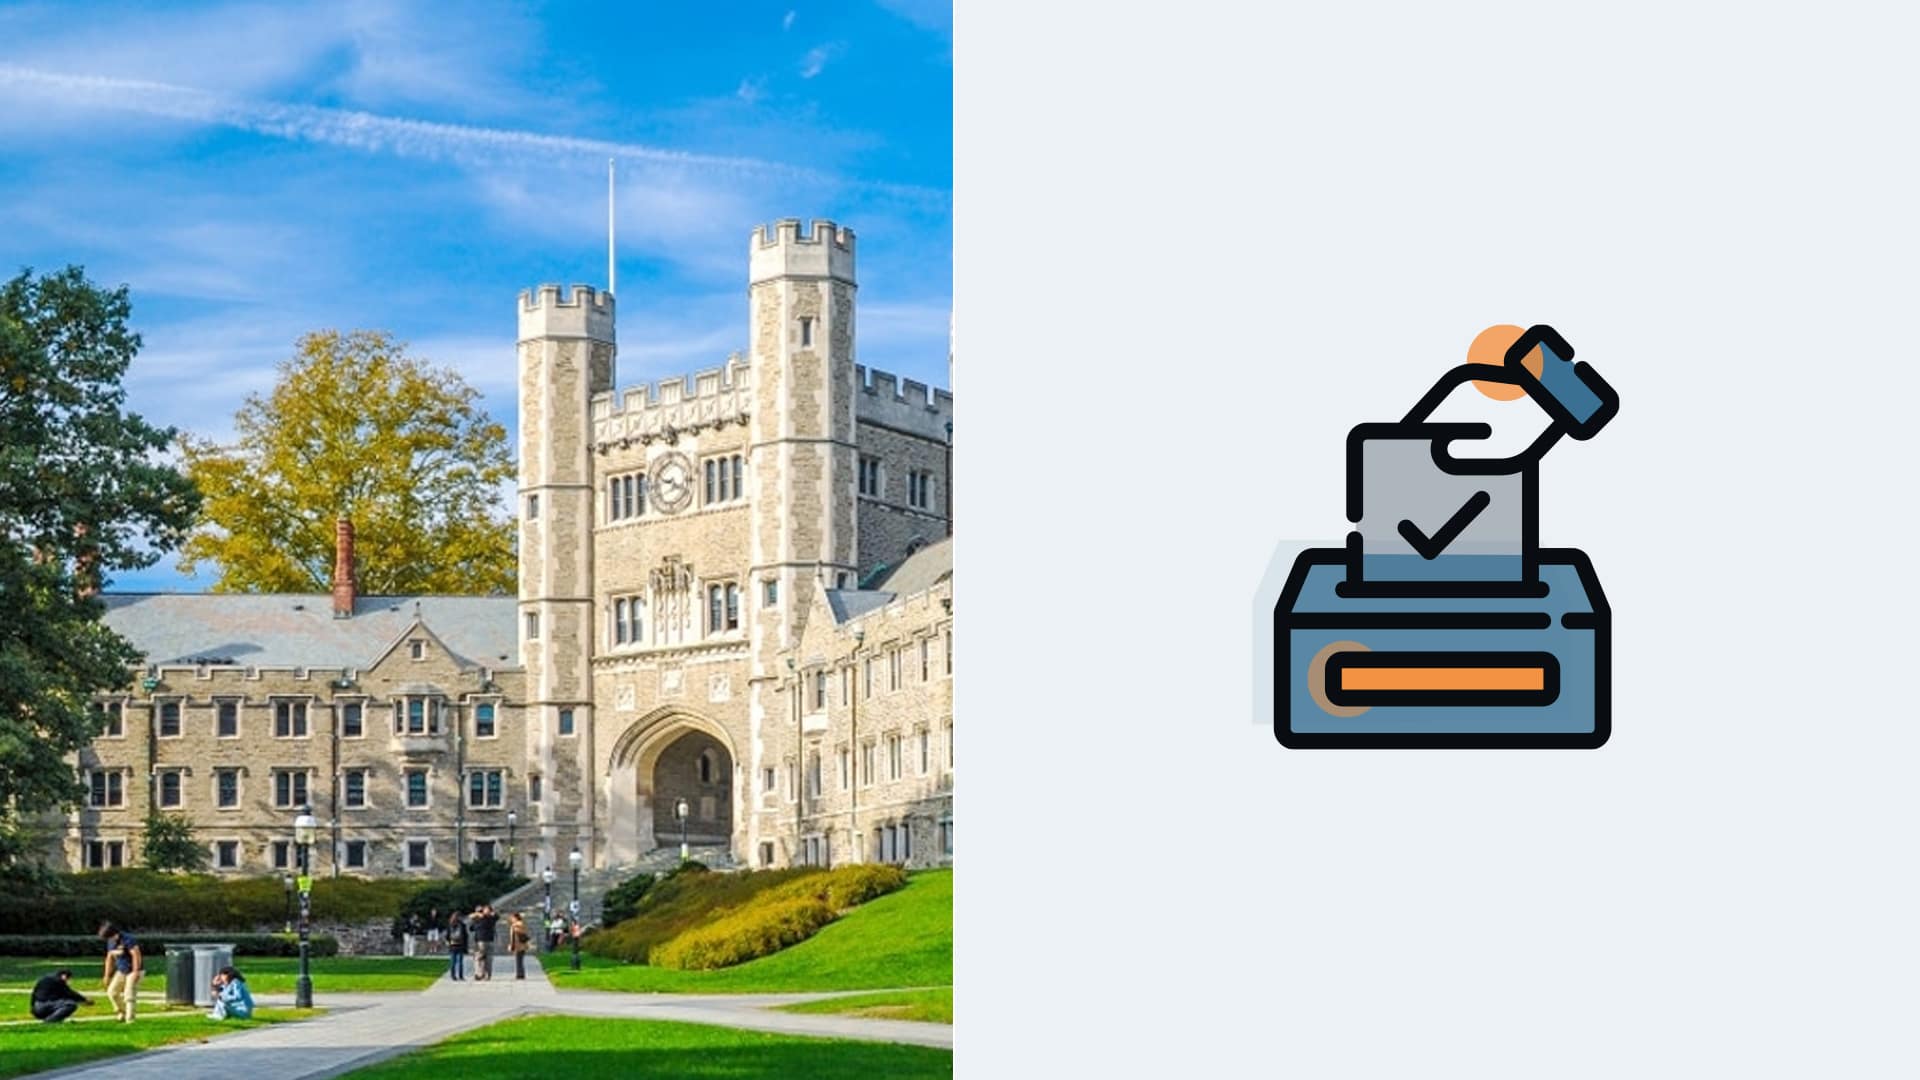 Princeton University and an Illustration depicting casting a ballot in an election.